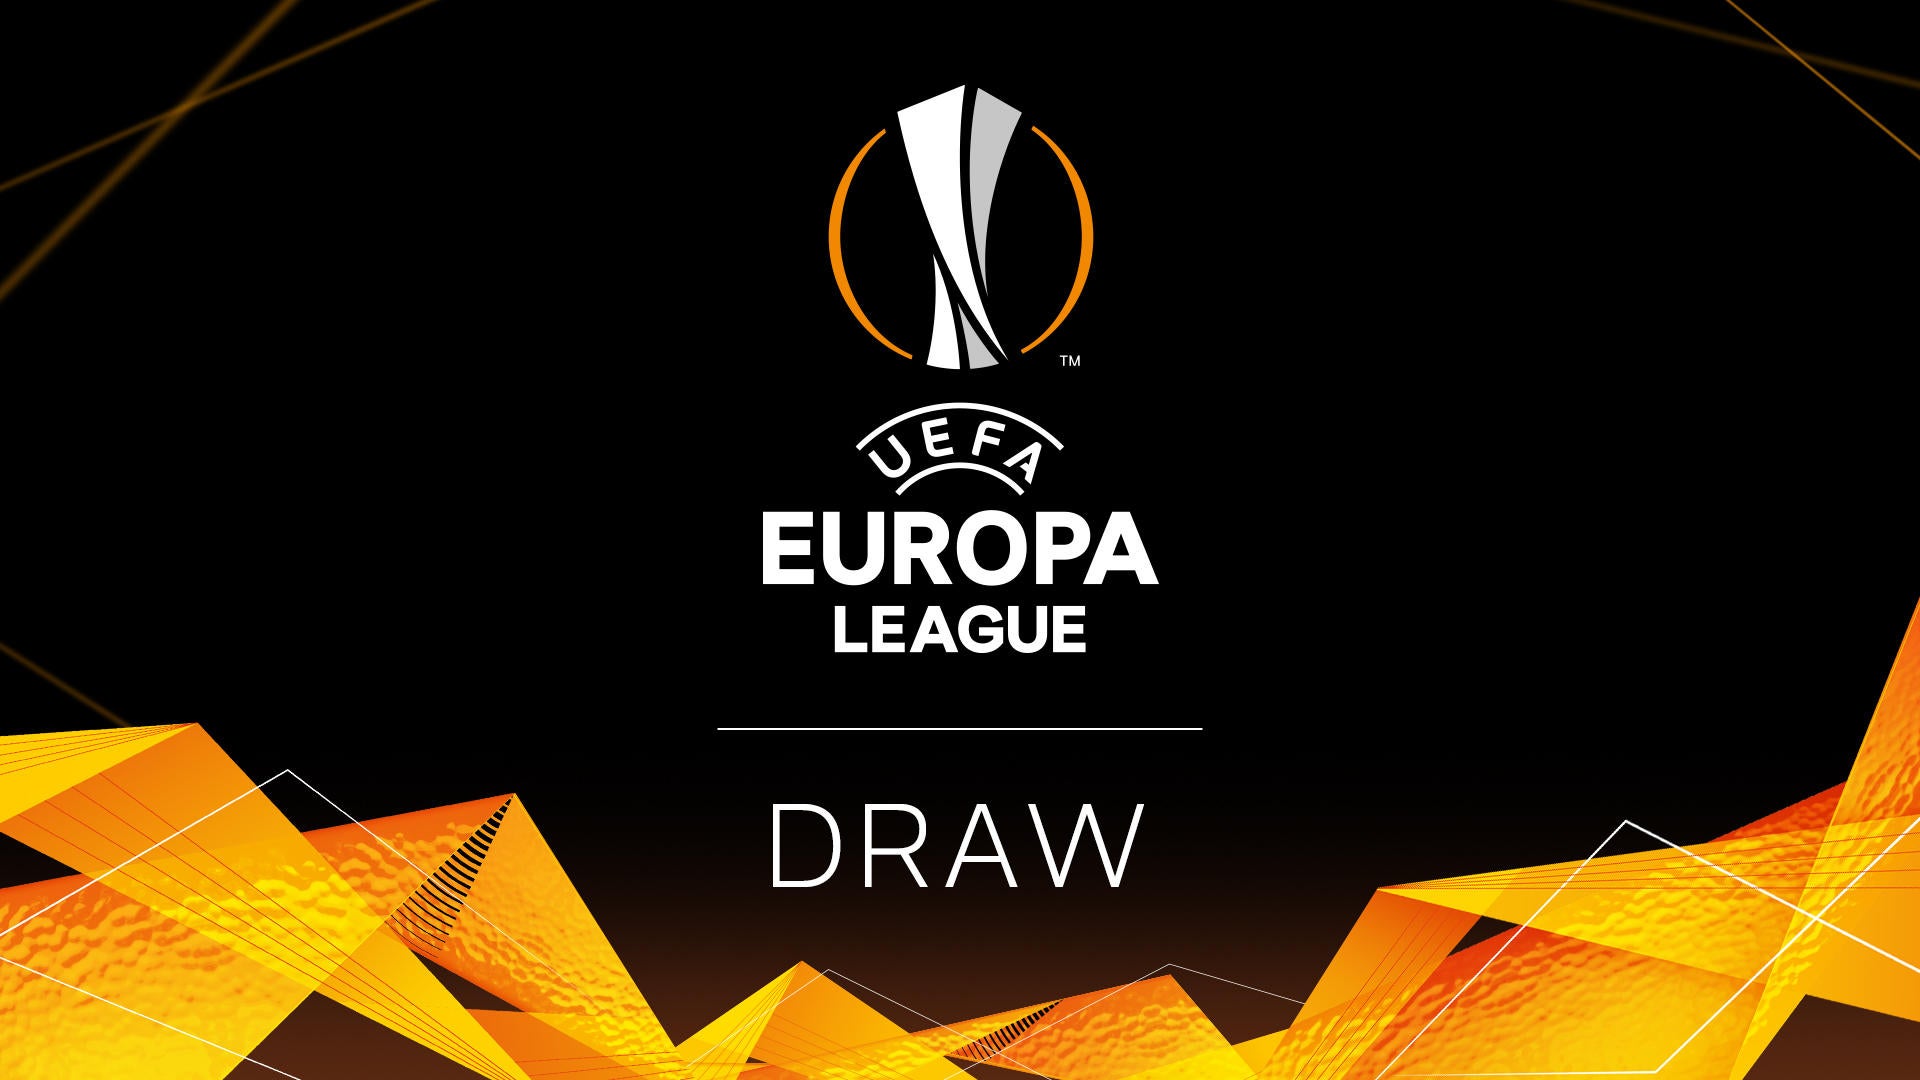 Europa League round of 16 draw Live stream, how to watch online, when